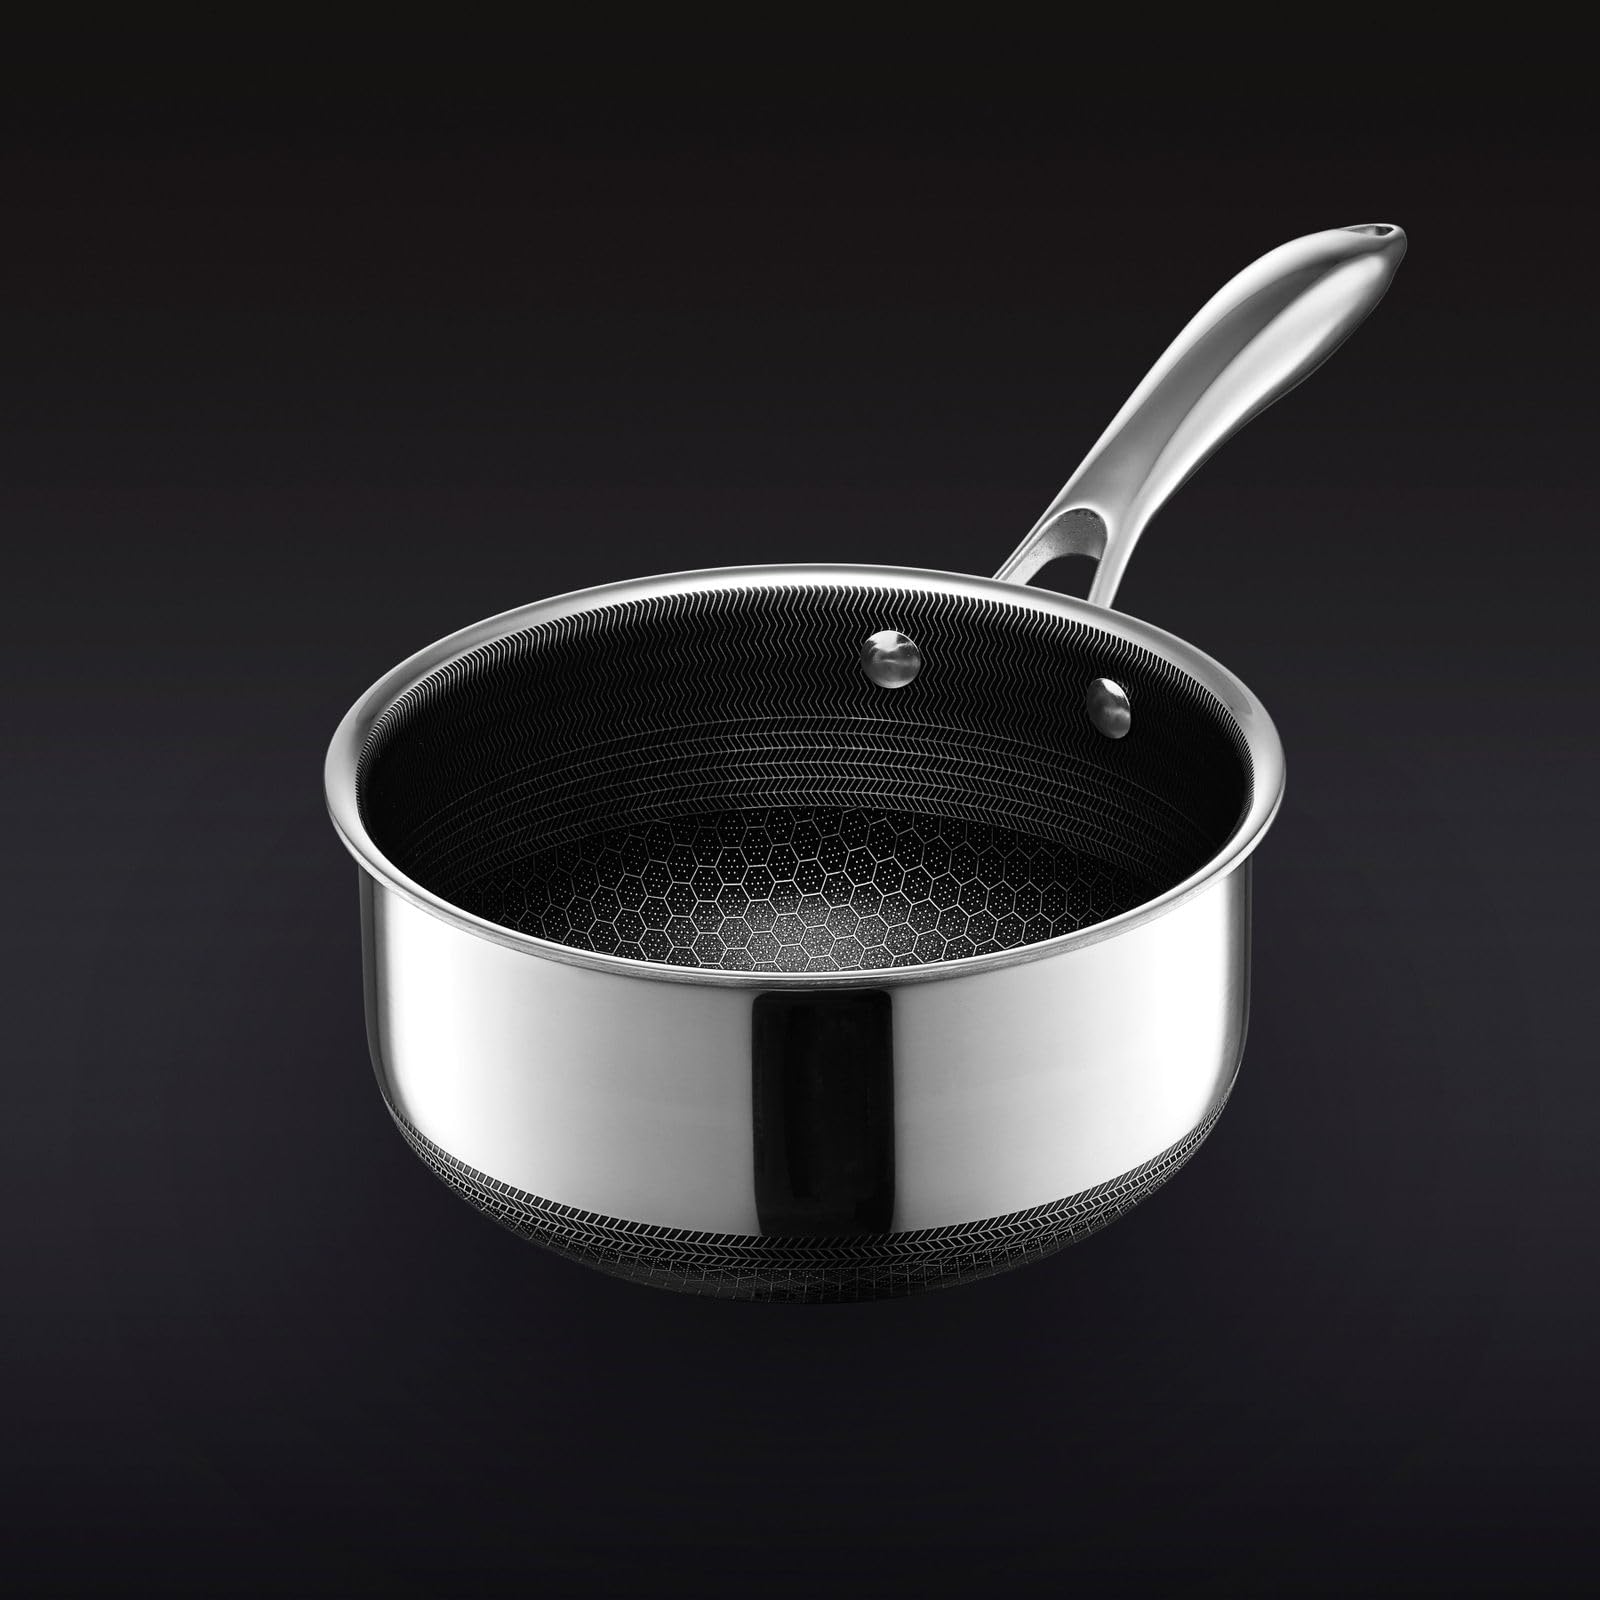 HexClad 2 Quart Hybrid Nonstick Saucepan and Lid, Dishwasher and Oven Friendly, Compatible with All Cooktops